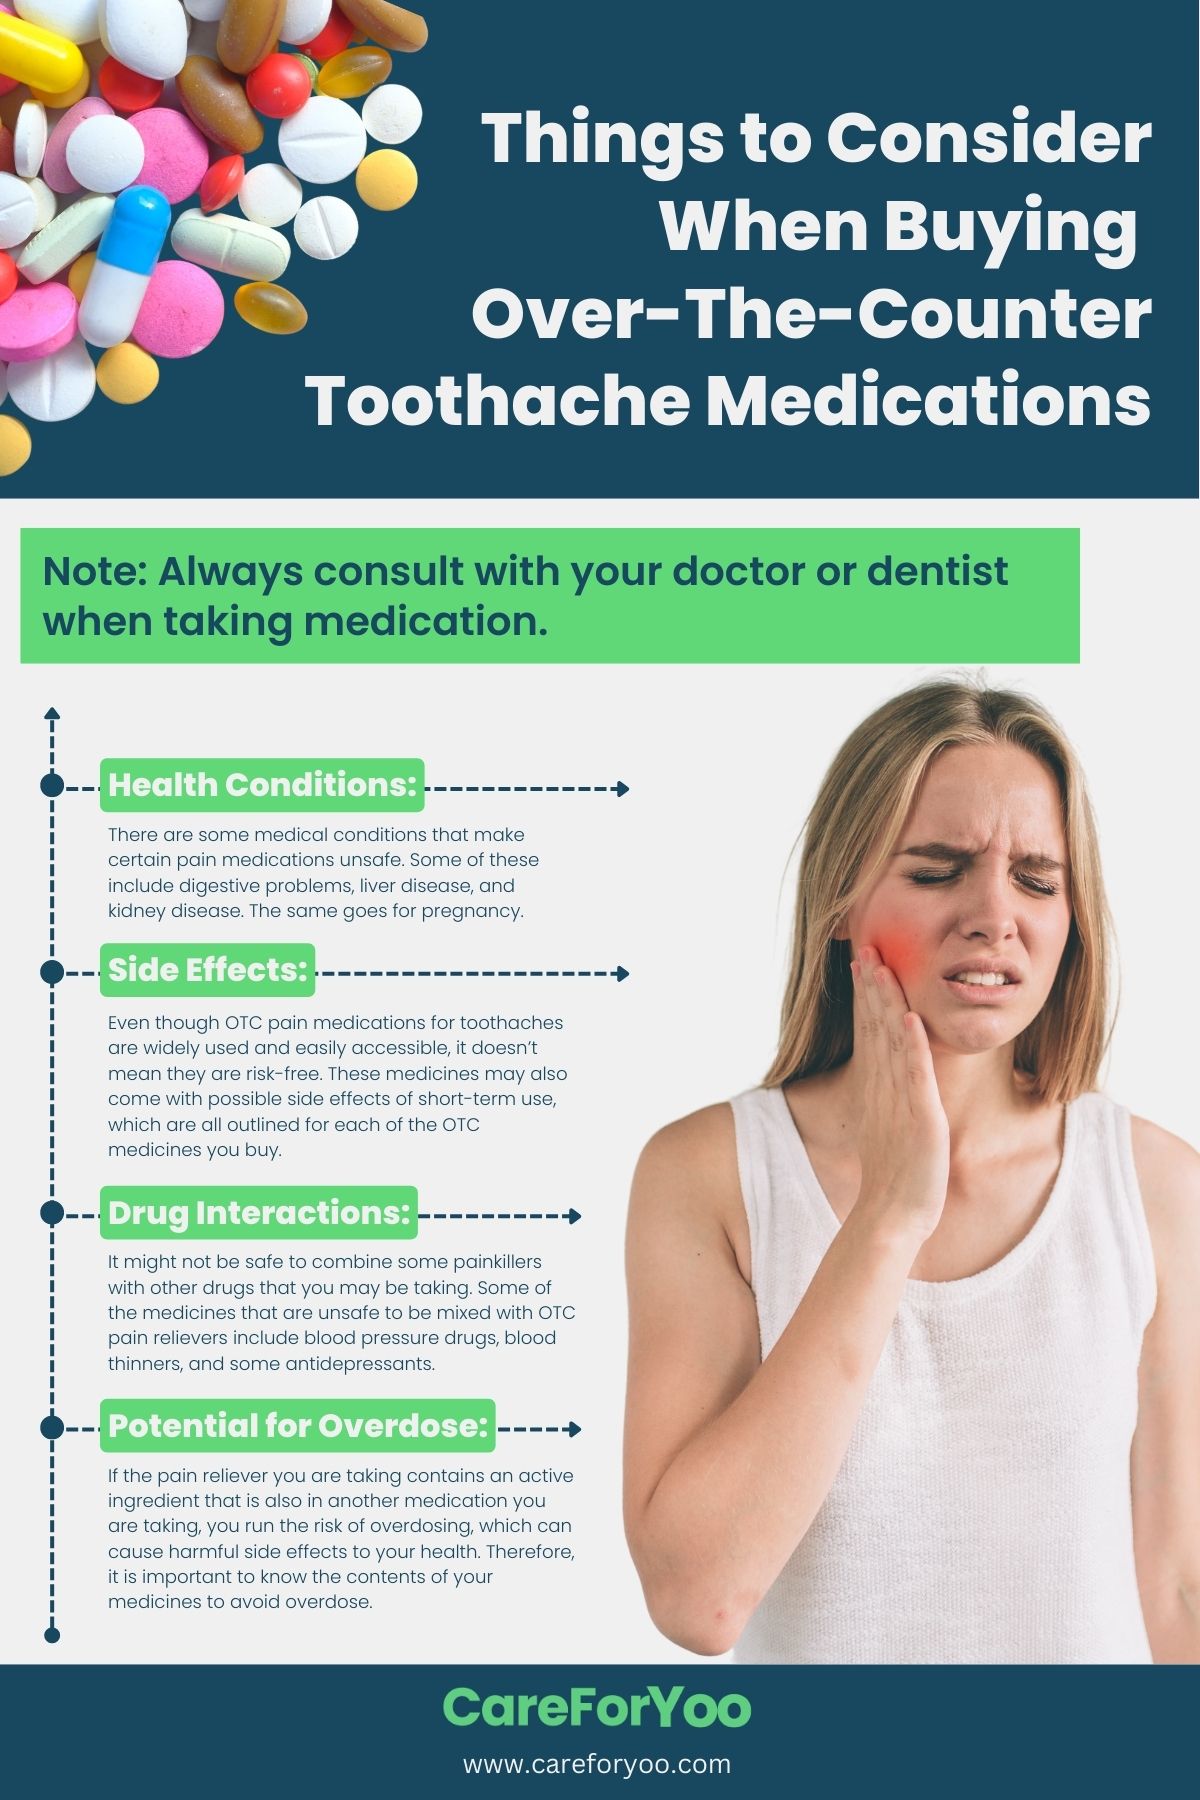 Things to Consider When Buying Over-The-Counter Toothache Medications